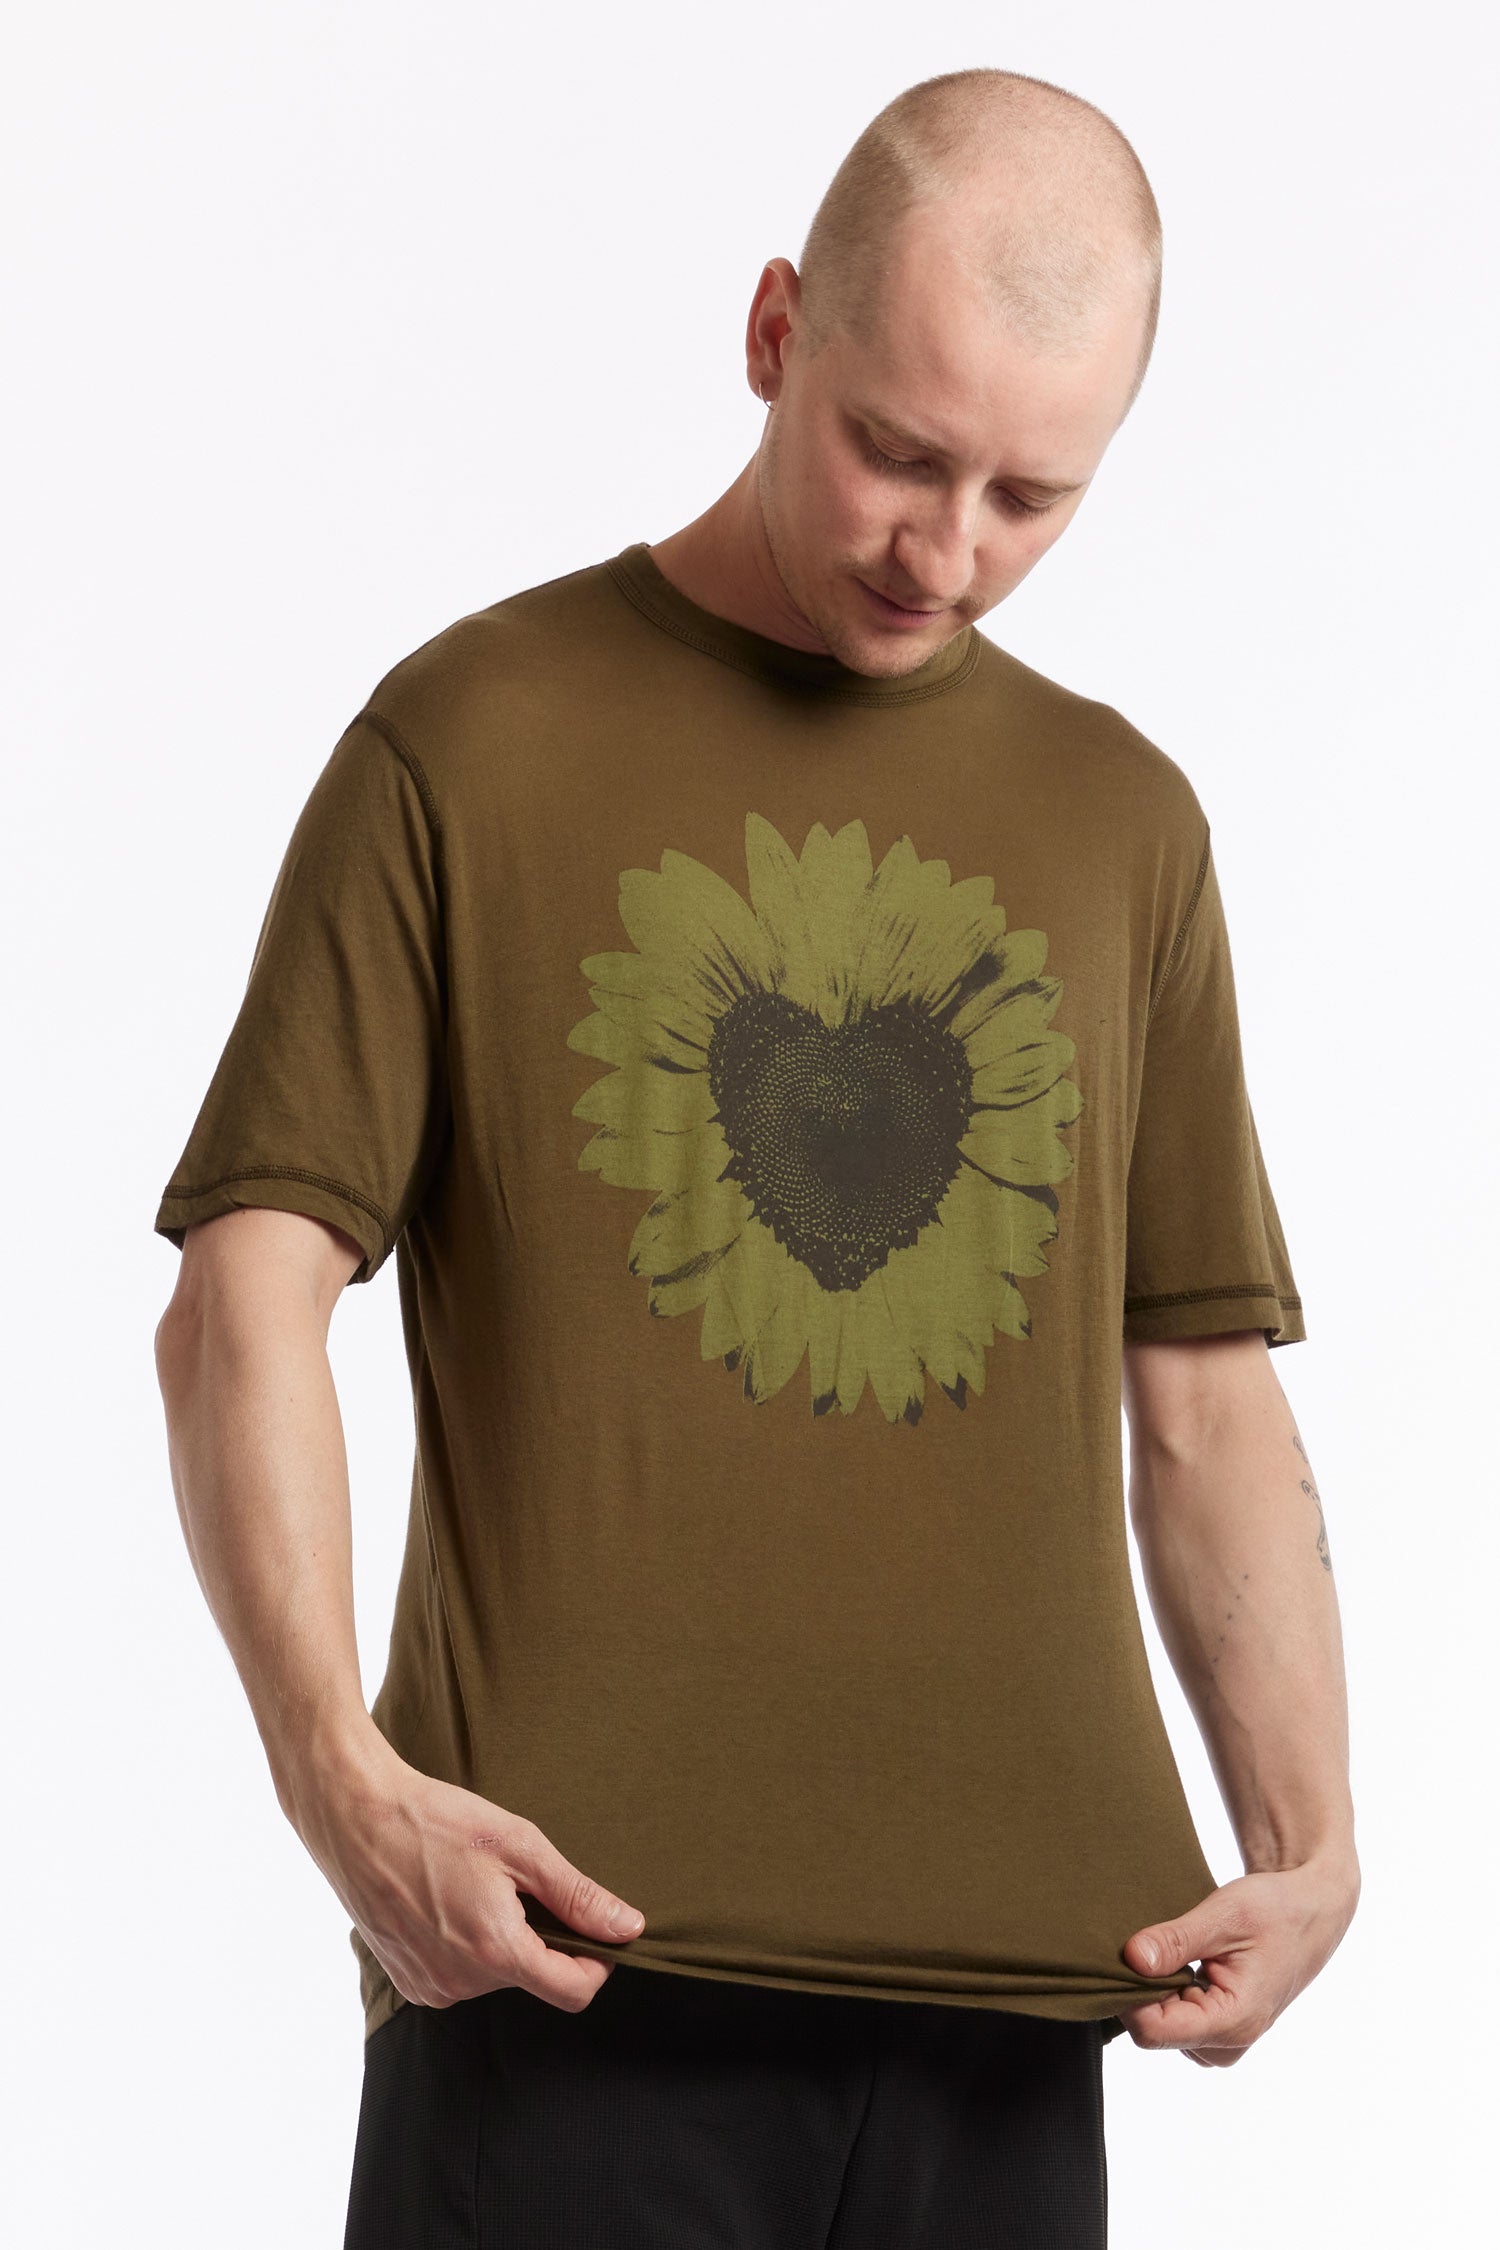 The AFFXWRKS - FLORA TEE OLIVE available online with global shipping, and in PAM Stores Melbourne and Sydney.